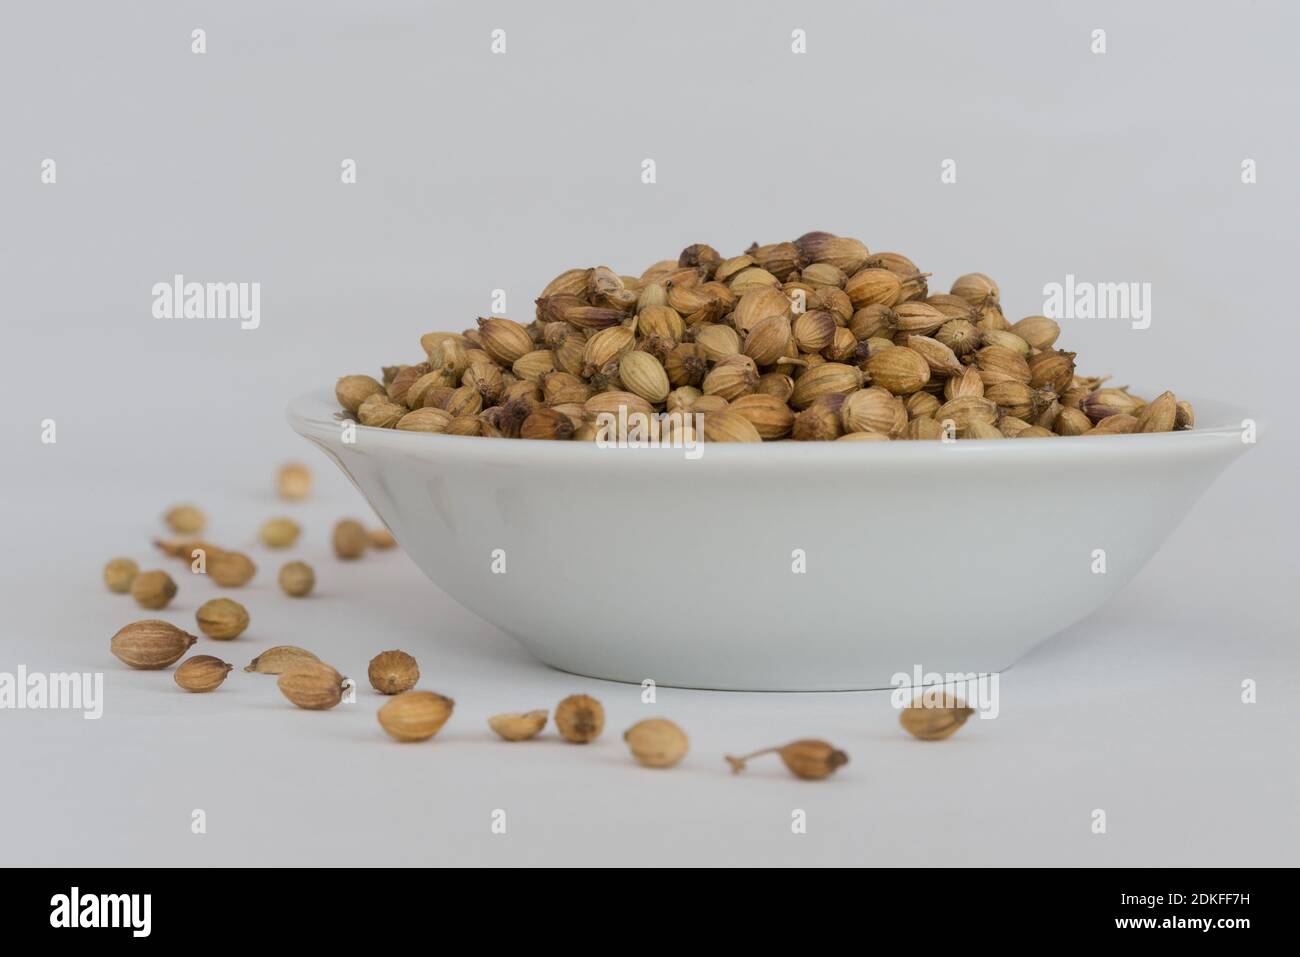 Seed In Bowl Against White Background Stock Photo